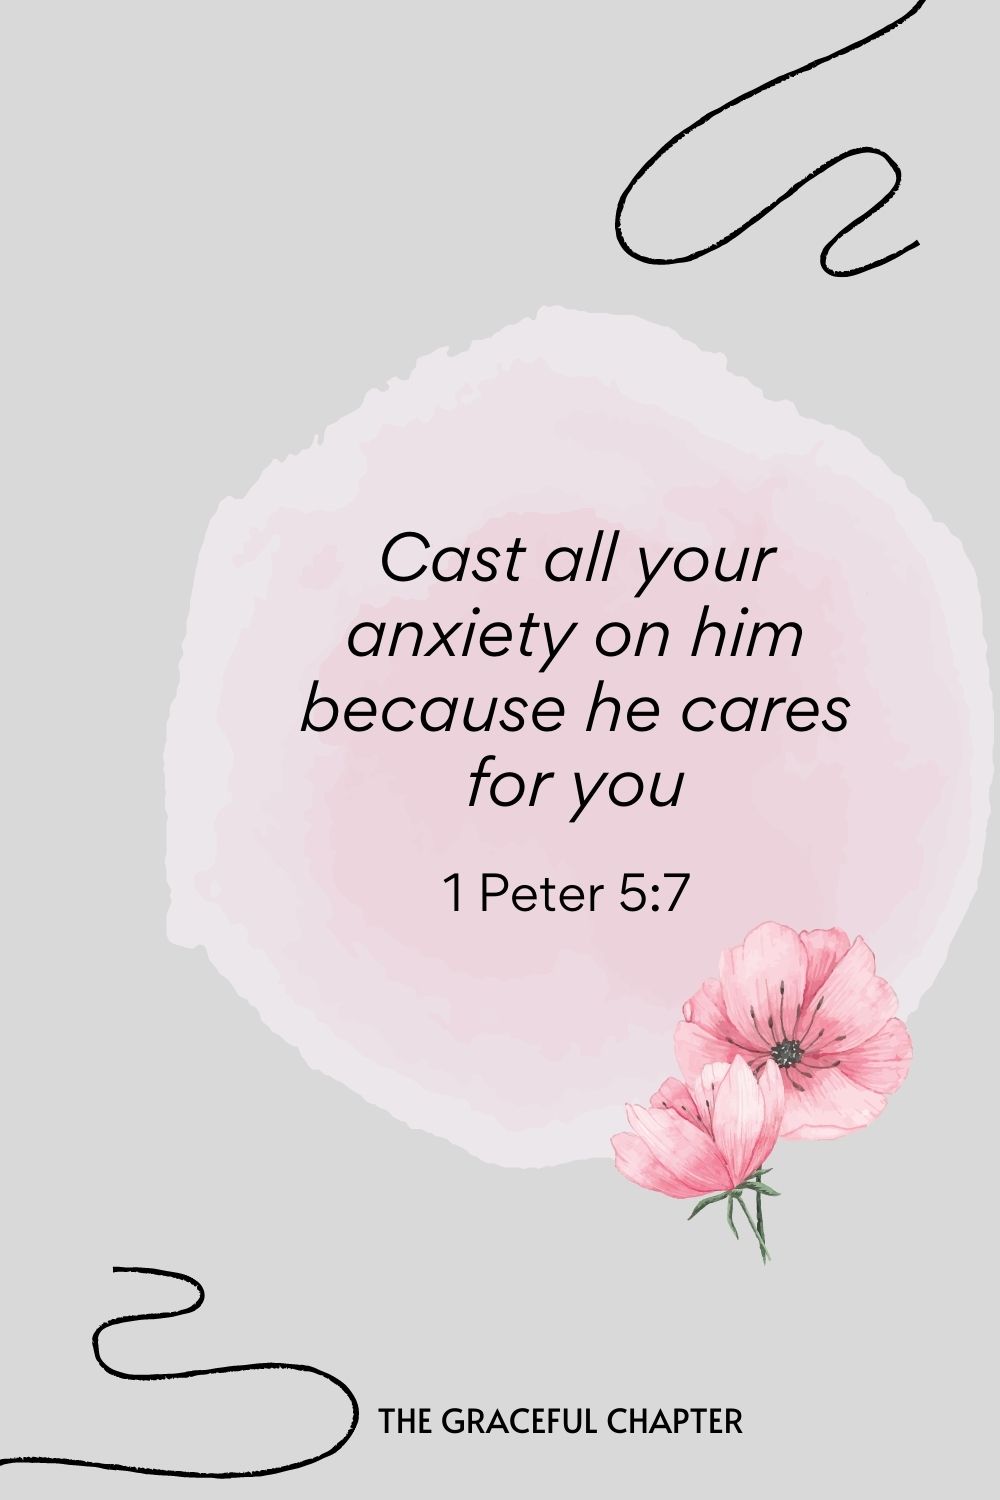 Cast all your anxiety on him because he cares for you.  1 Peter 5:7